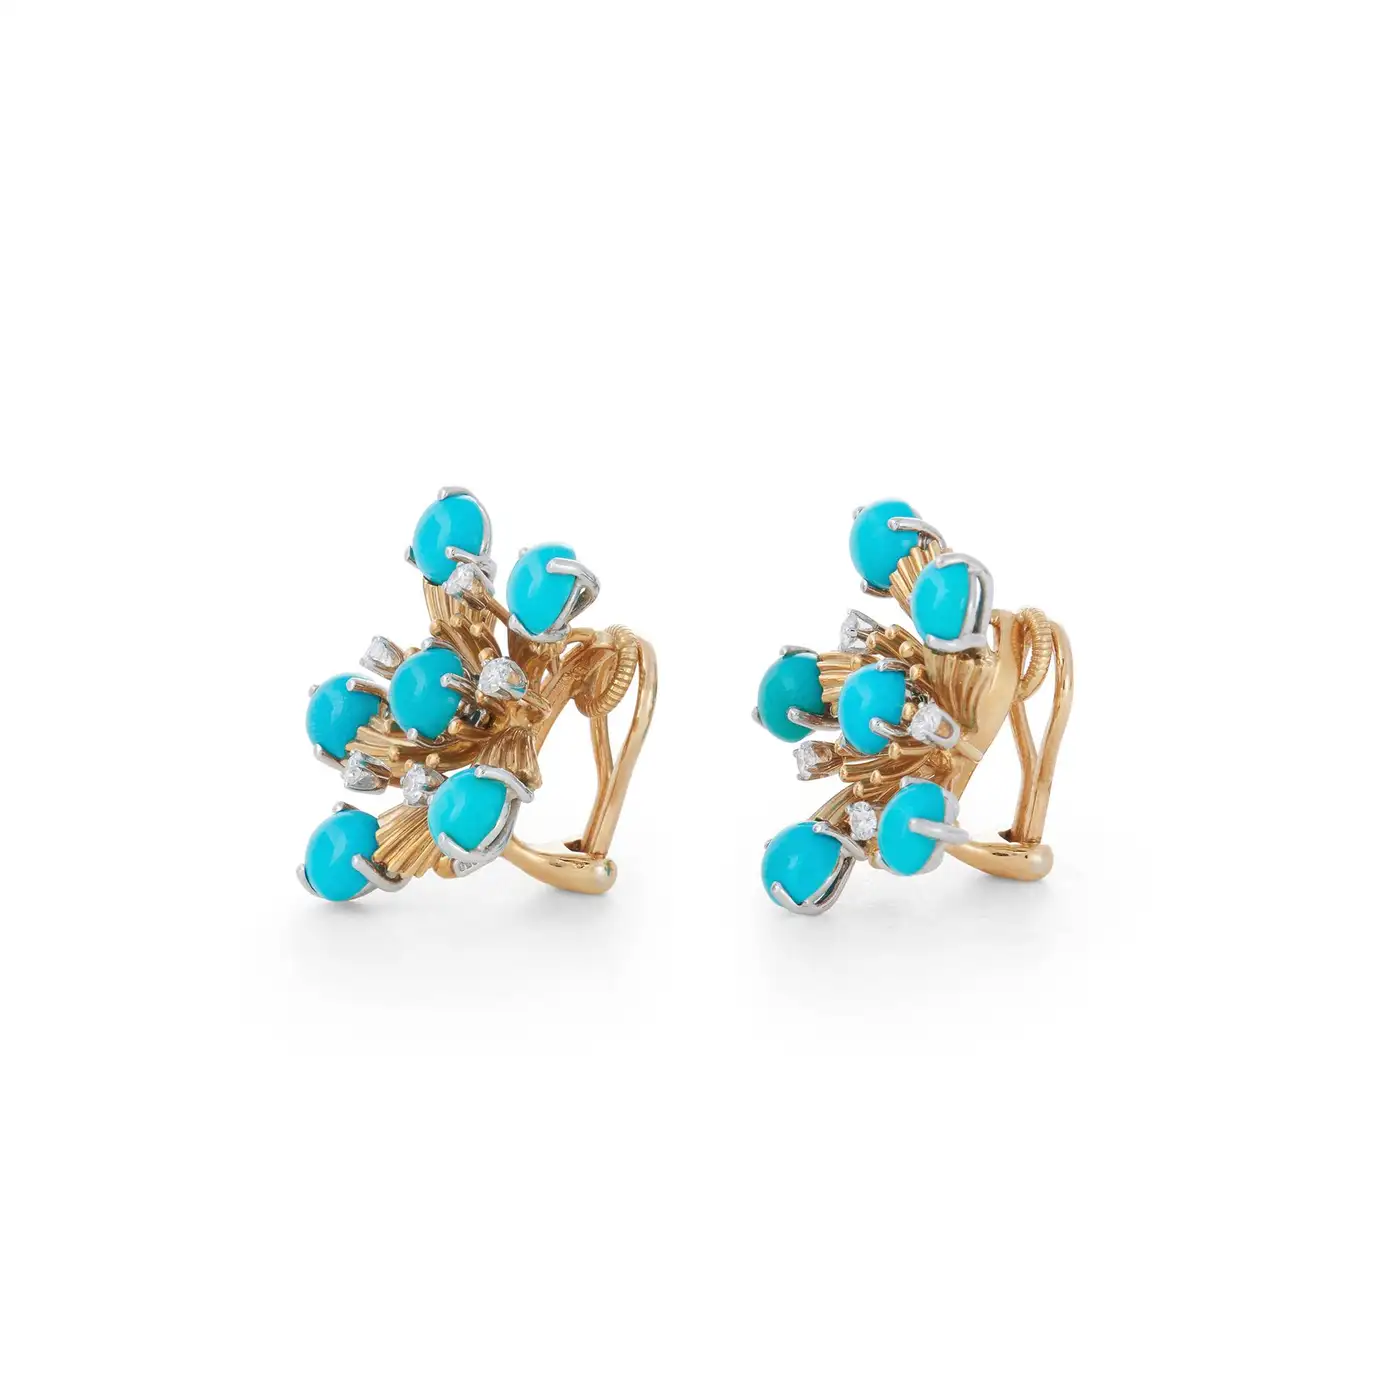 Snowflake-Turquoise-and-Diamond-Ear-Clips-Jean-Schlumberger-for-Tiffany-Co-6.webp